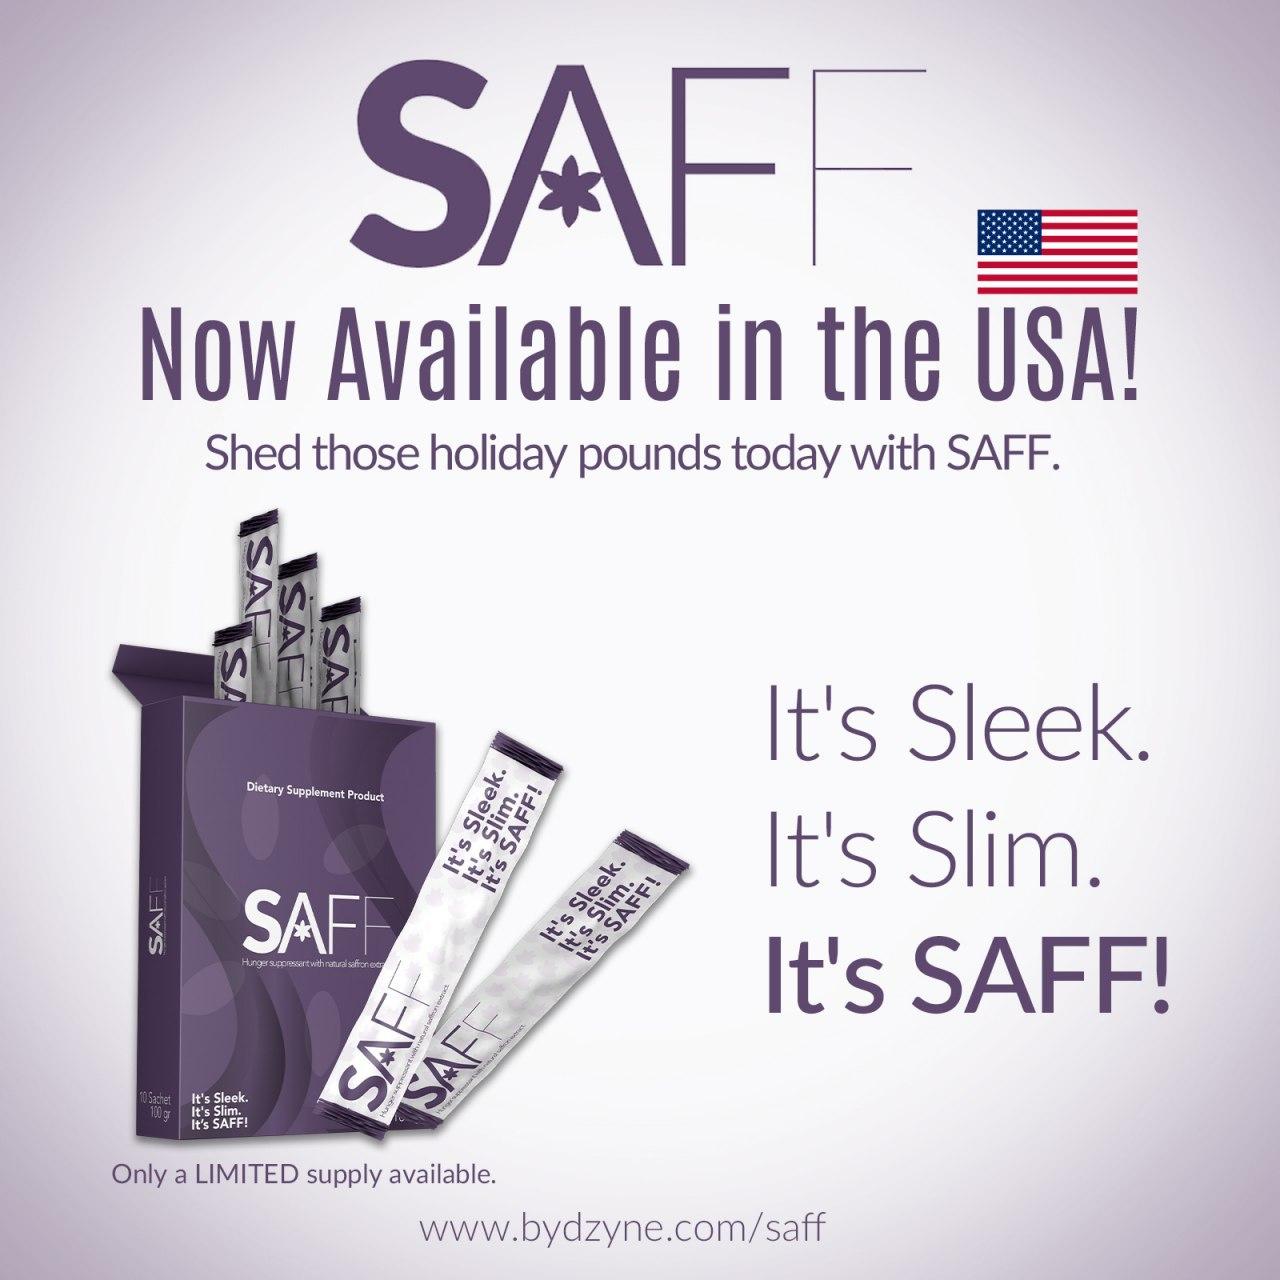 It’s Sleek. It’s Slim. And it’s NOW in the USA!